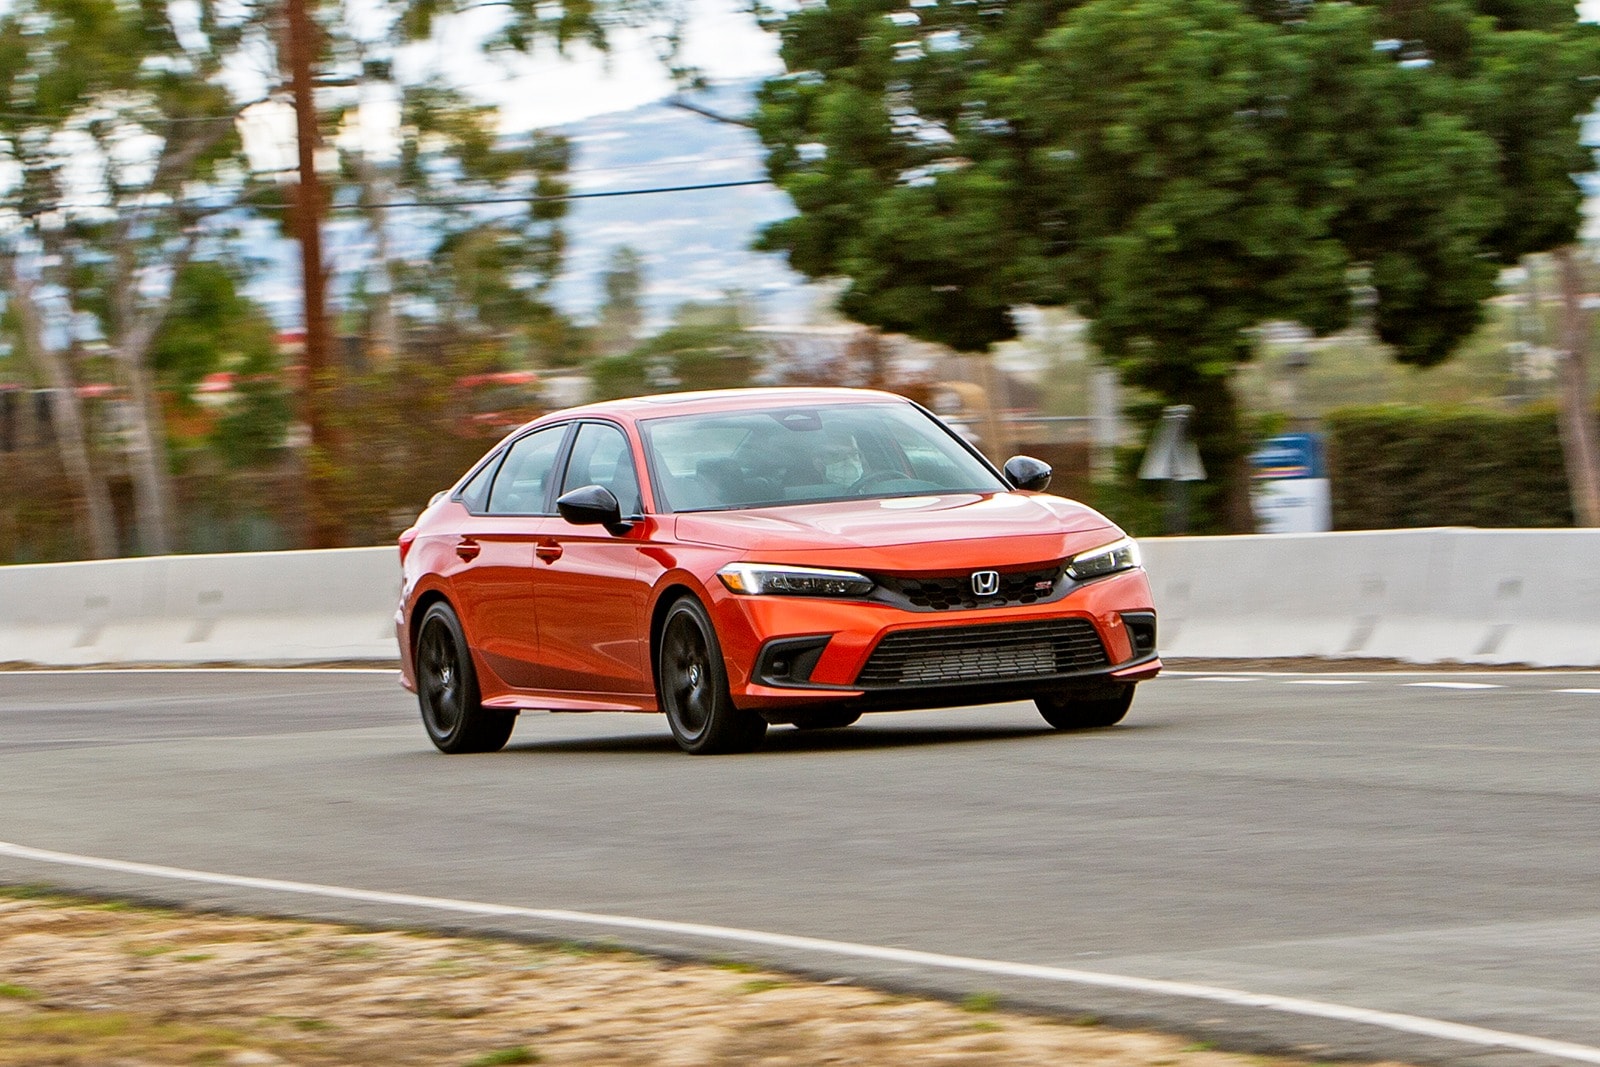 TESTED: 2022 Honda Civic Si Is Slower but Great to Drive